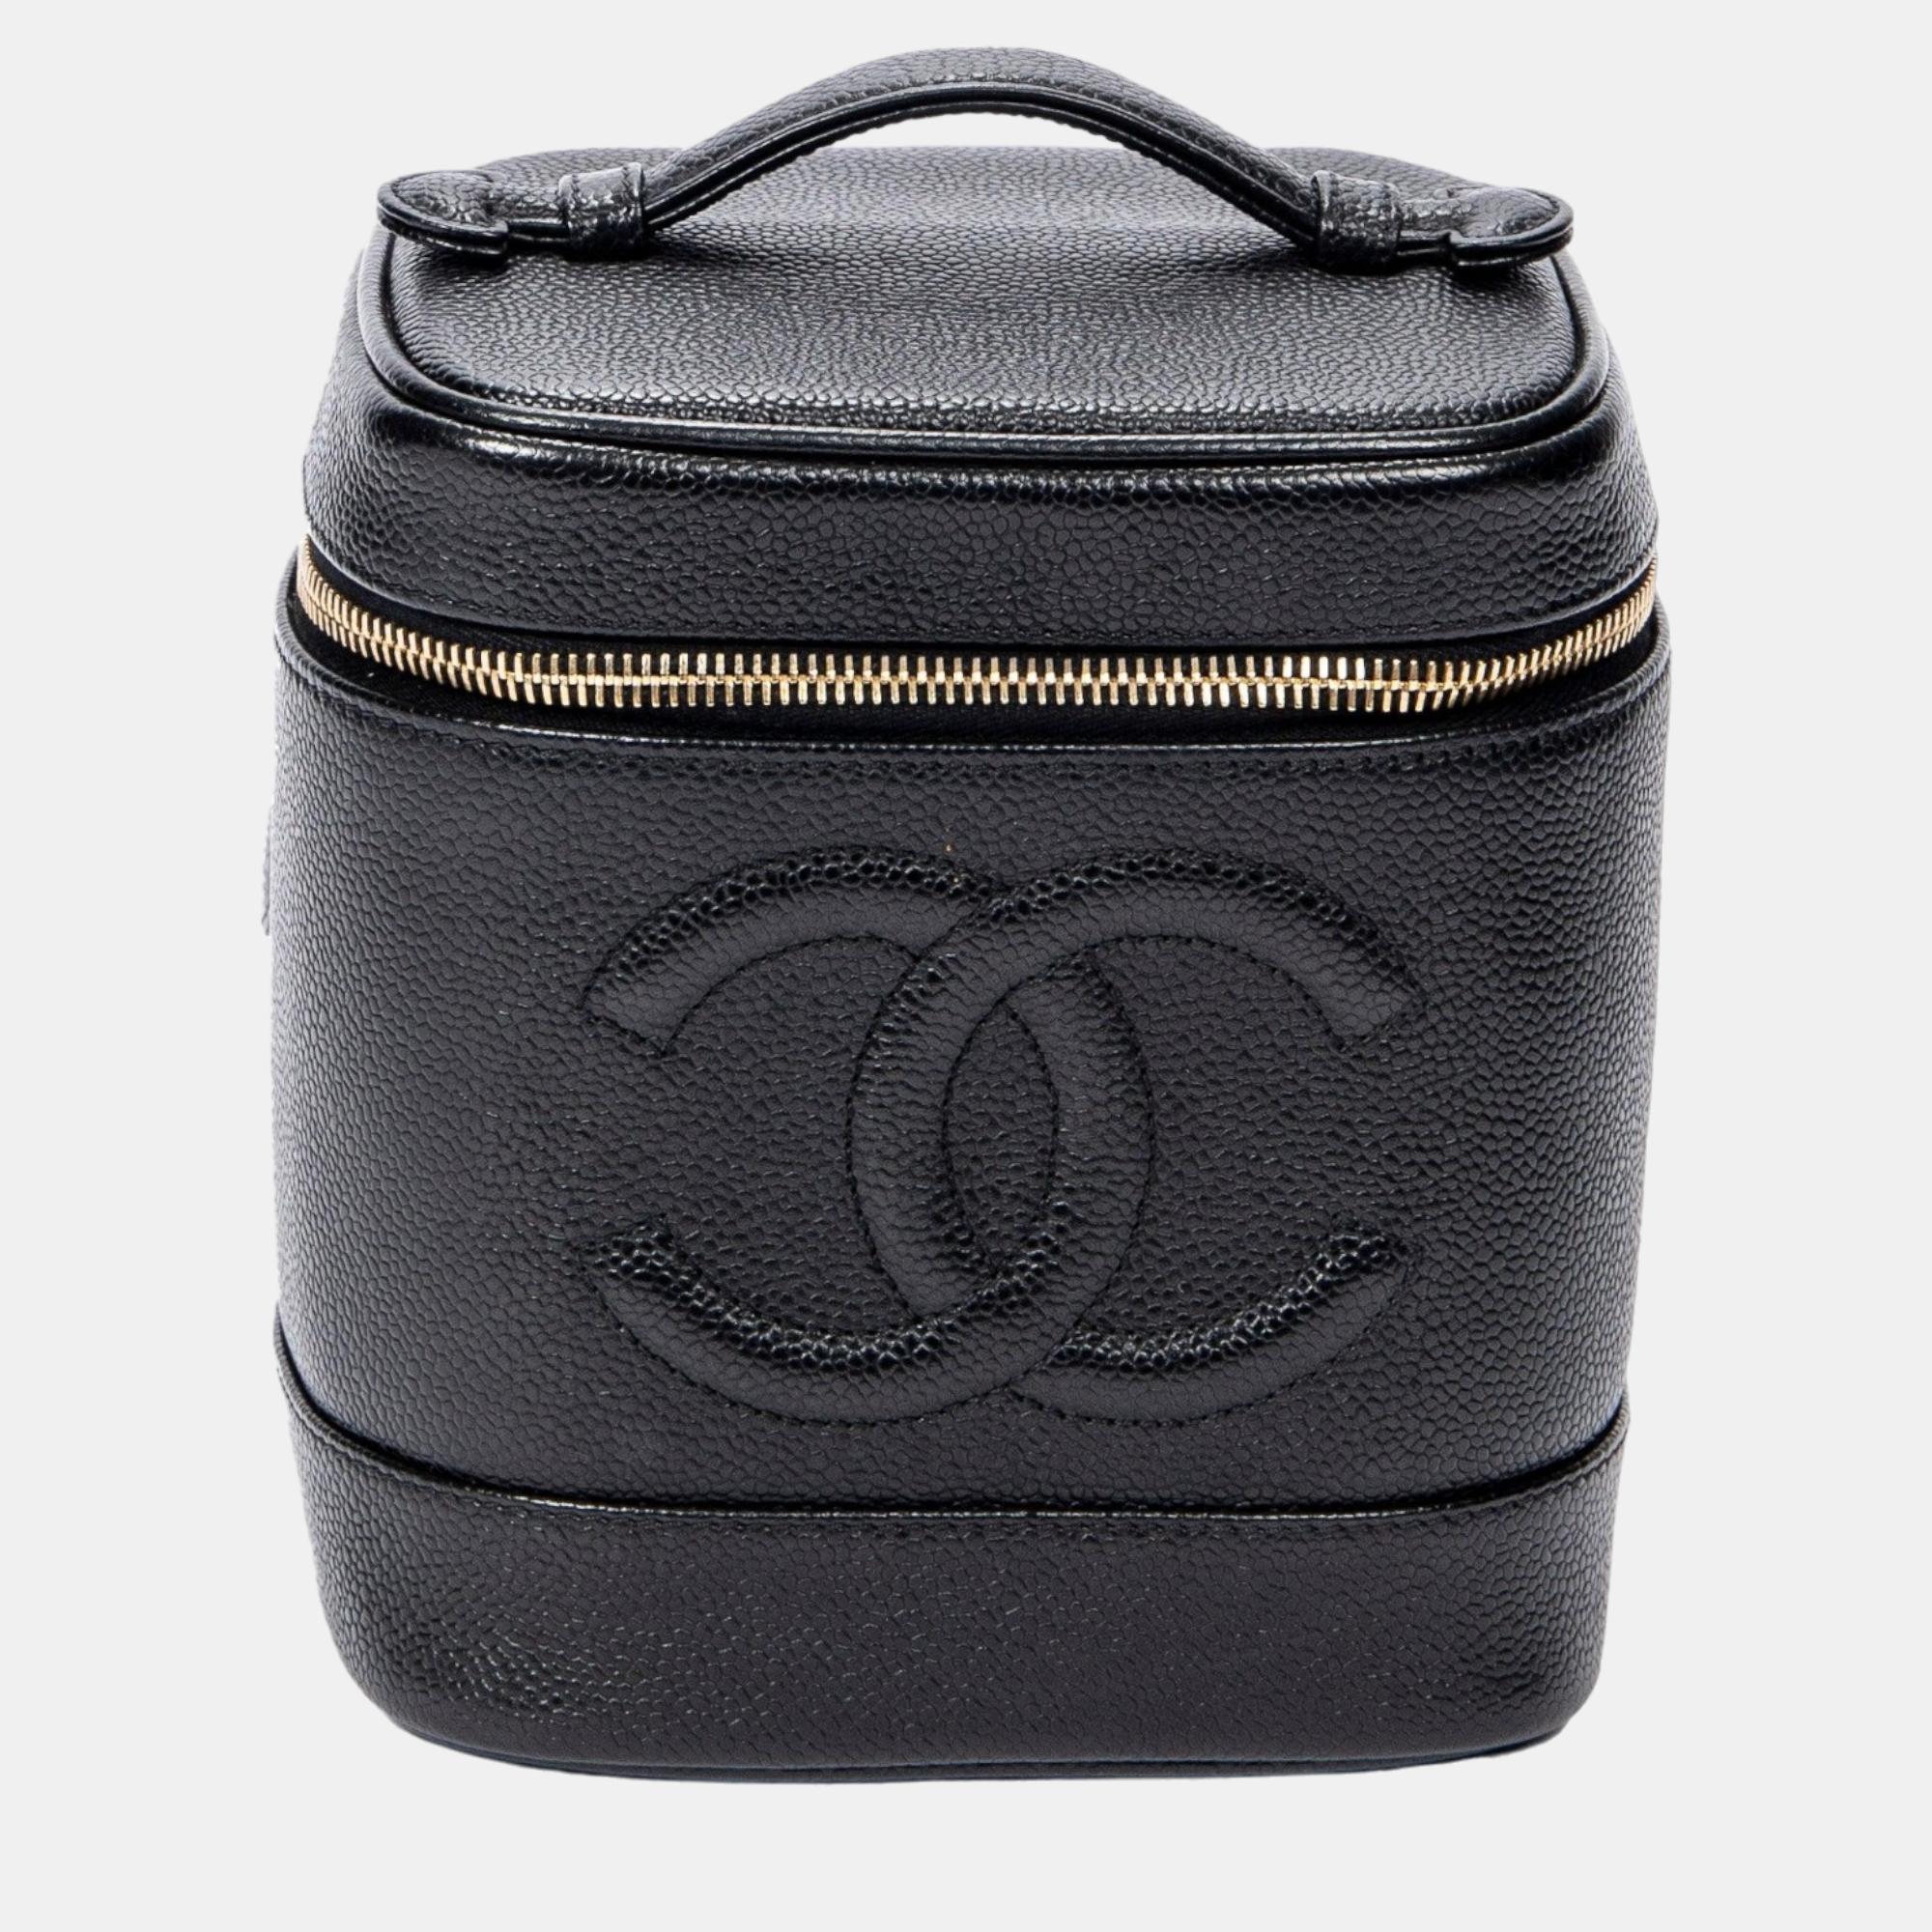 Pre-owned Chanel Black Leather Cc Timeless Vanity Clutch Bag